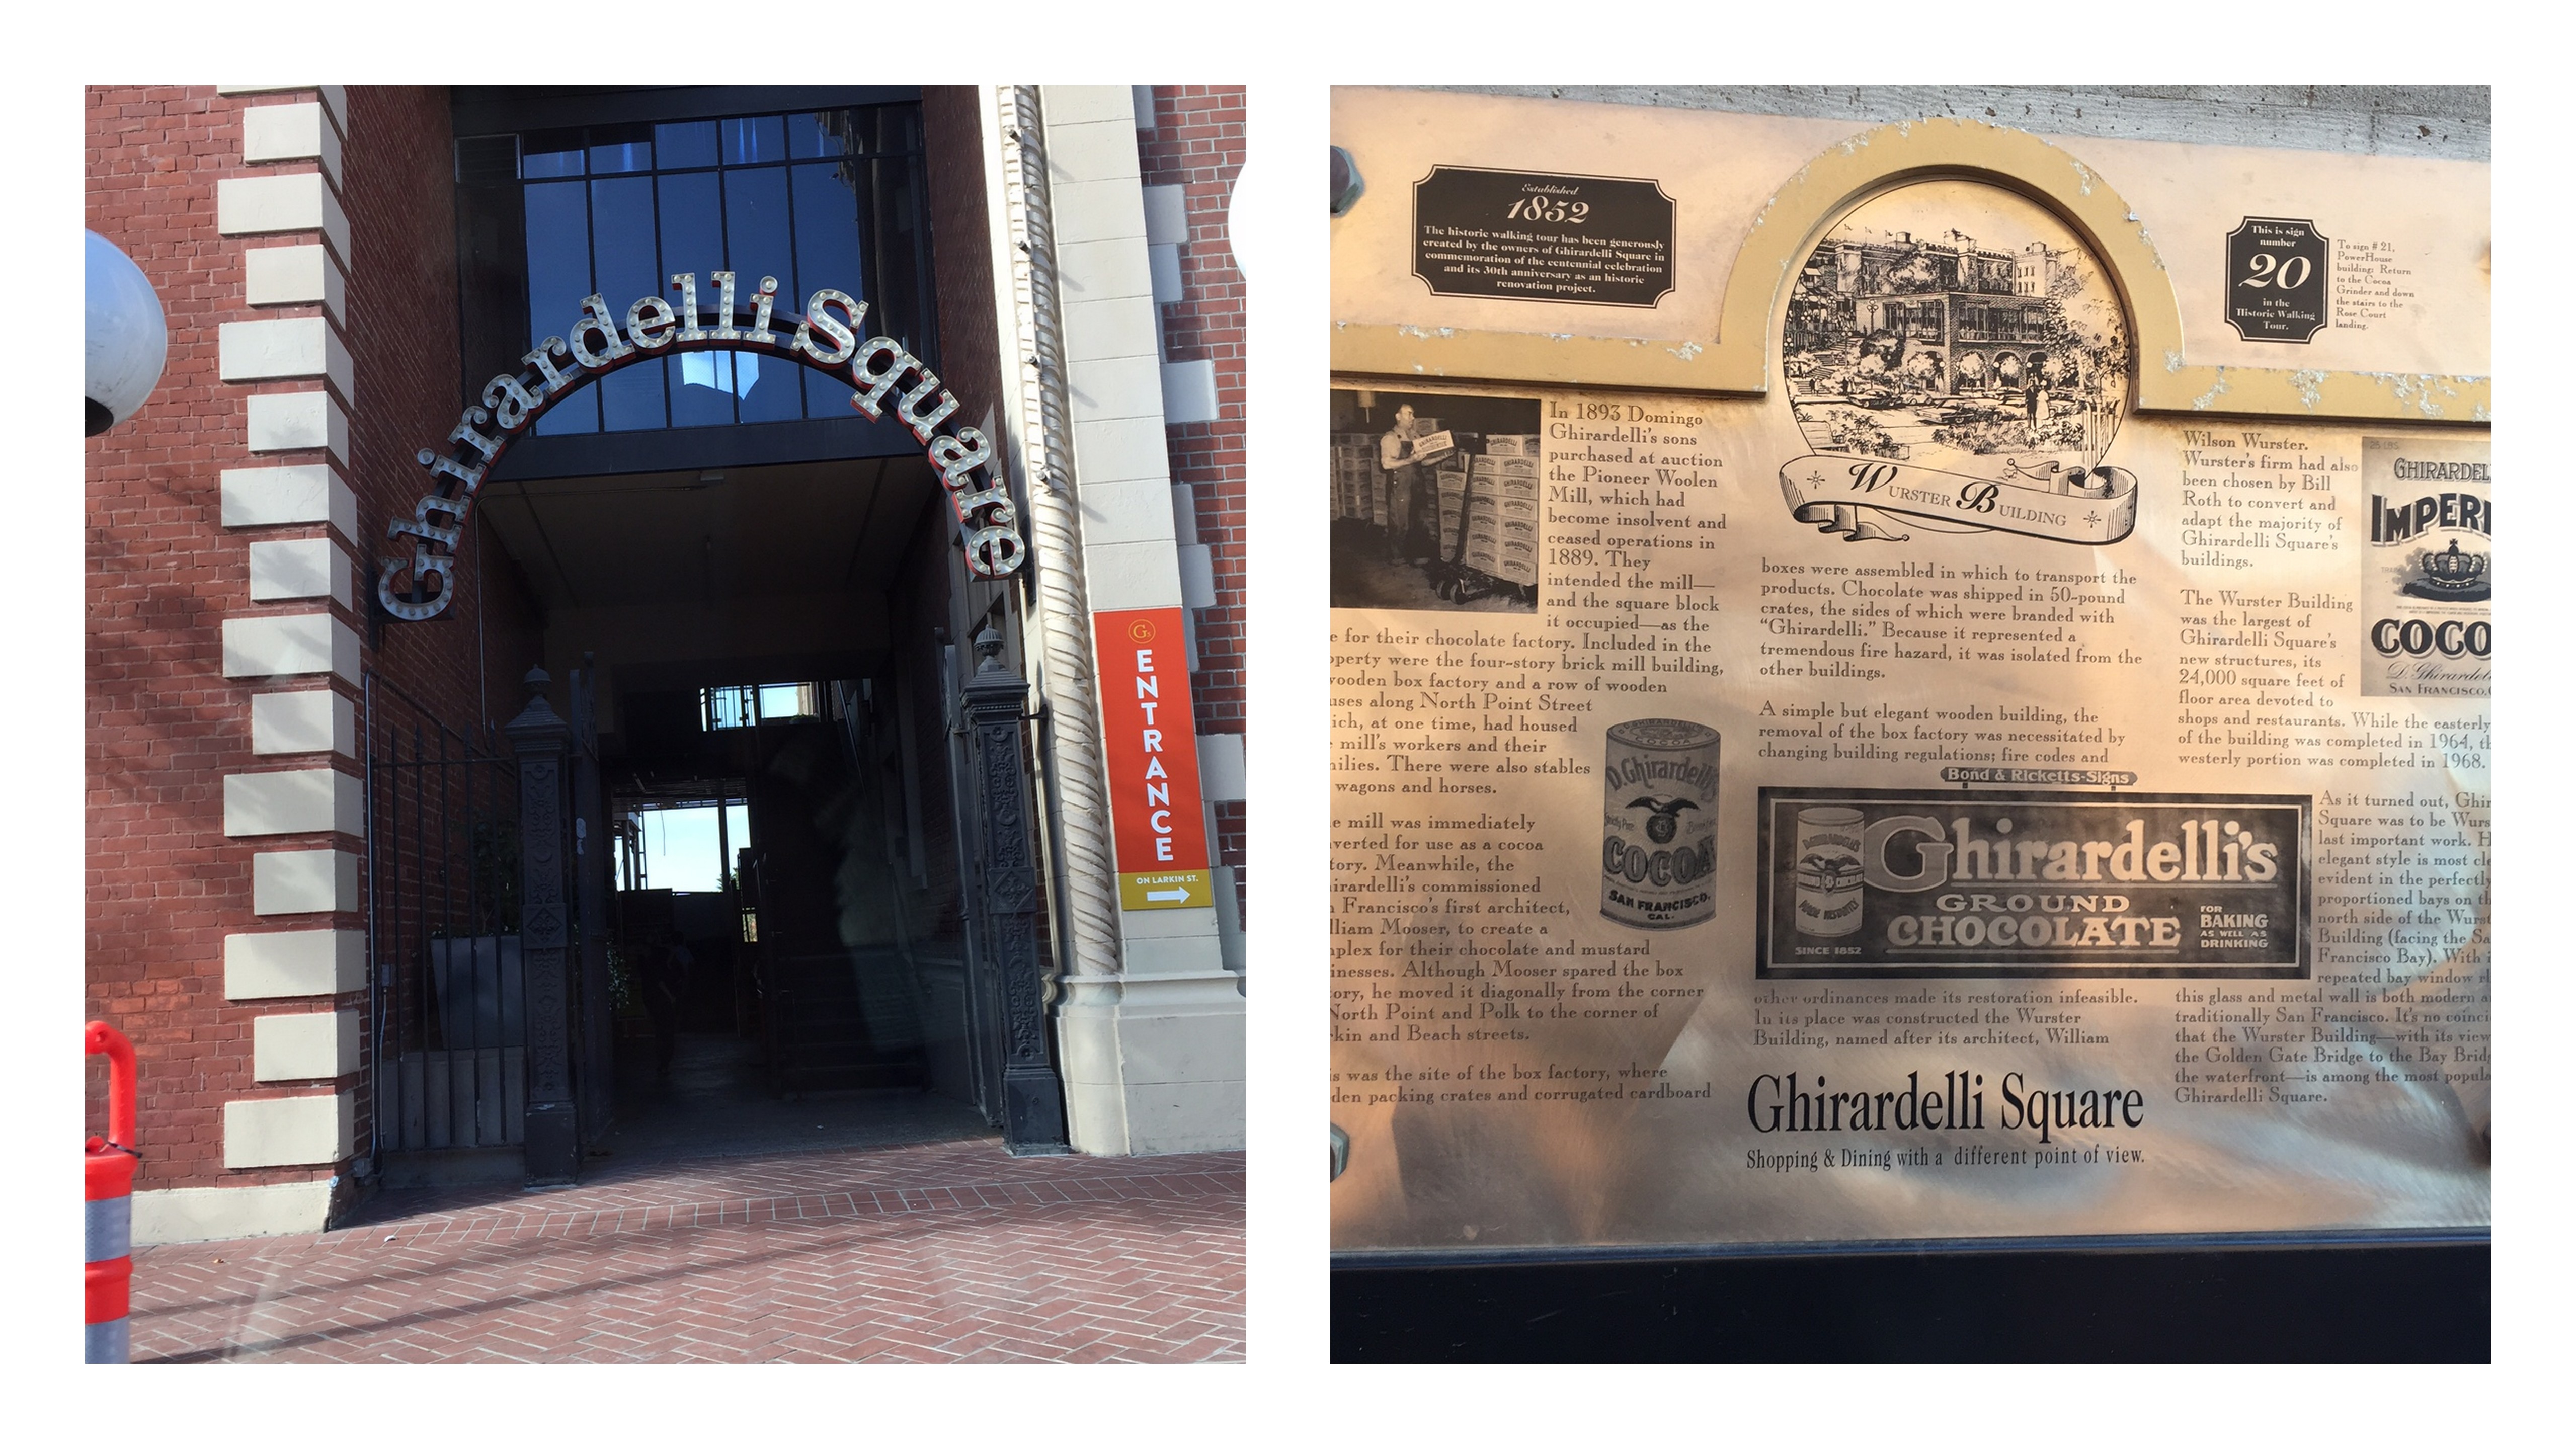 Ghiradelli and Sees Candies